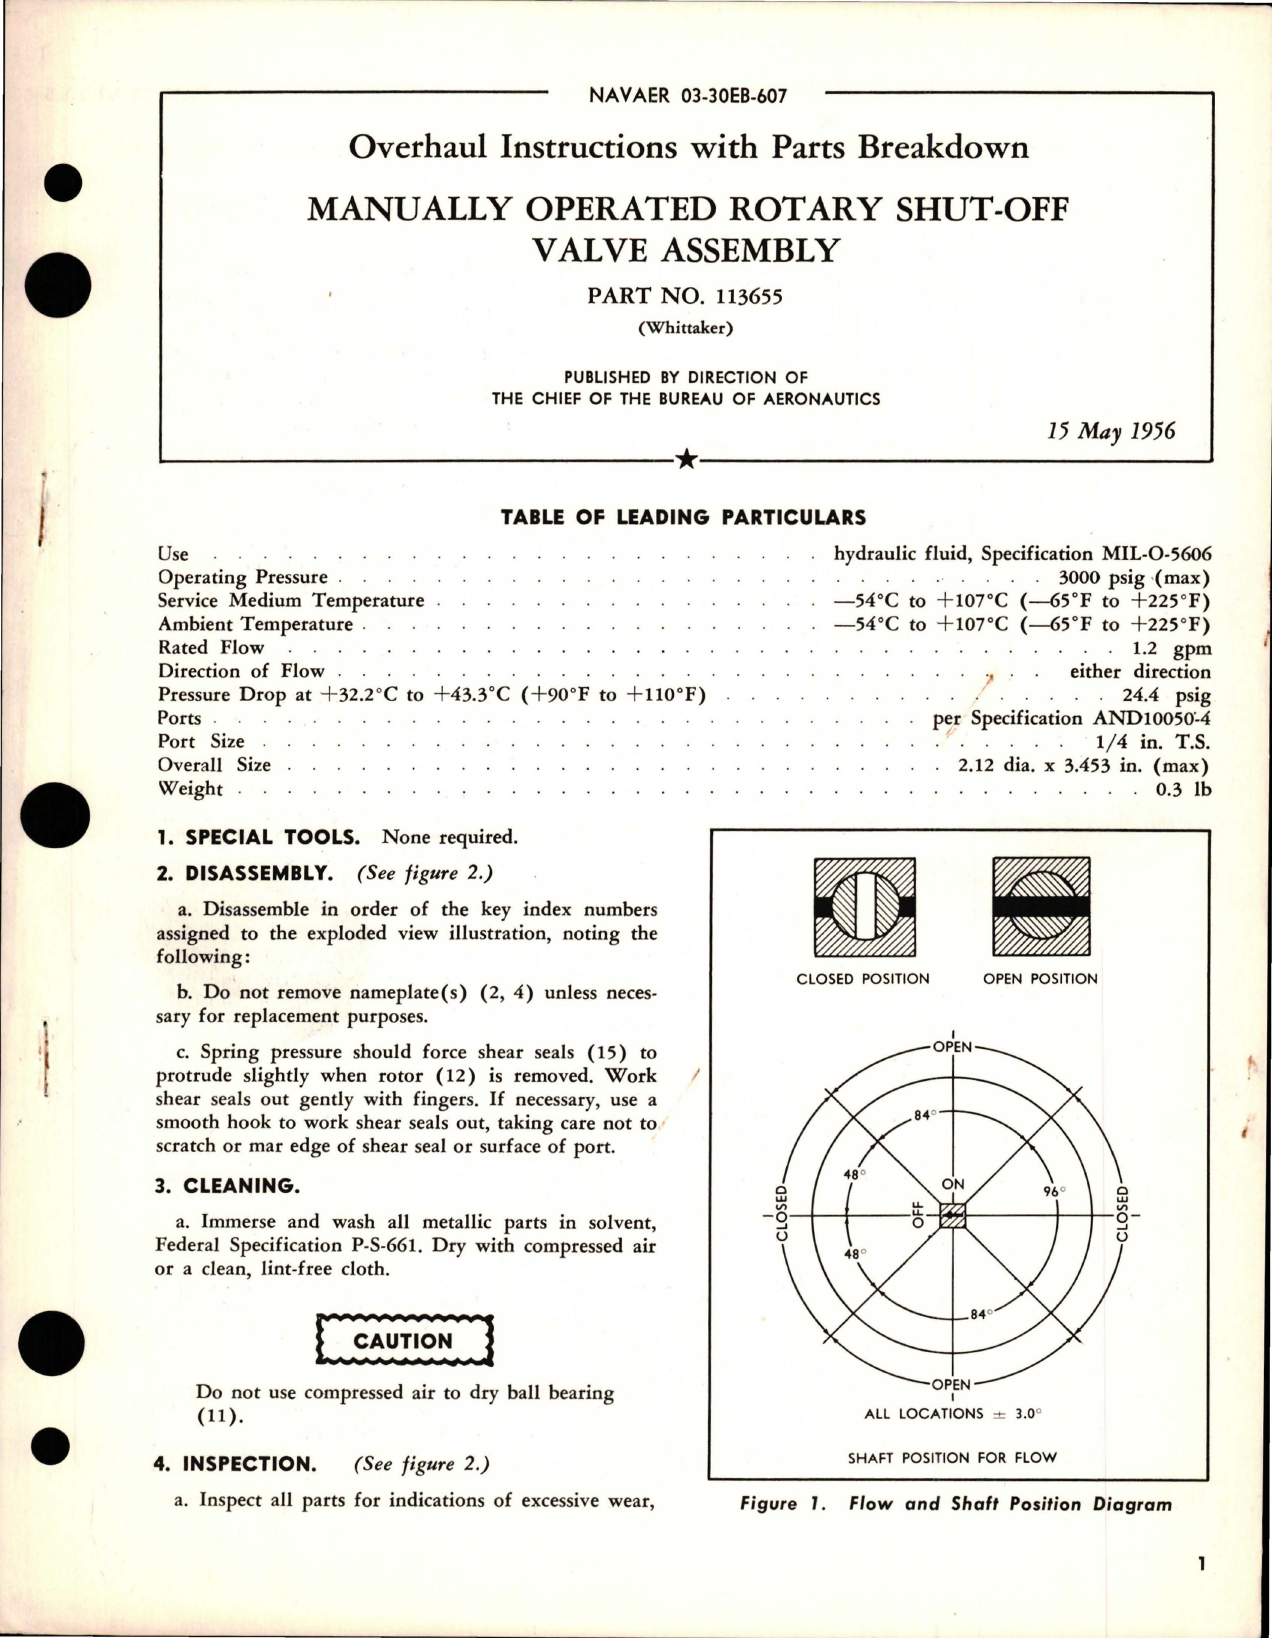 Sample page 1 from AirCorps Library document: Overhaul Instructions with Parts for Manually Operated Rotary Shut Off Valve Assembly - Part 113655